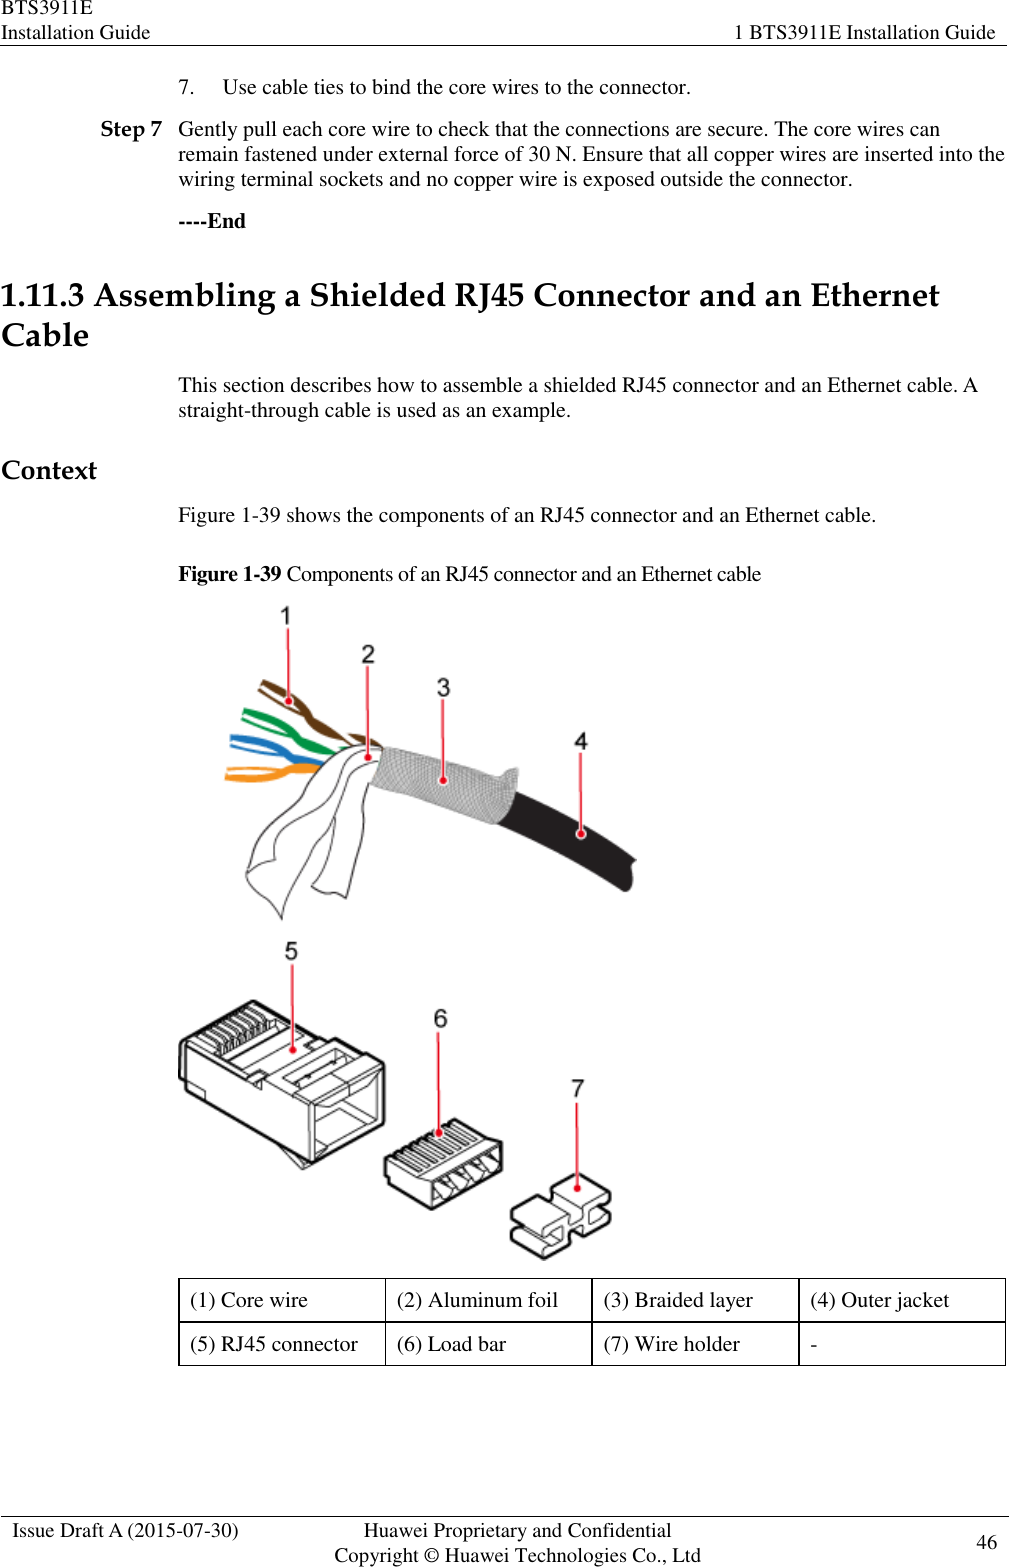 BTS3911E Installation Guide 1 BTS3911E Installation Guide  Issue Draft A (2015-07-30) Huawei Proprietary and Confidential           Copyright © Huawei Technologies Co., Ltd 46    7. Use cable ties to bind the core wires to the connector. Step 7 Gently pull each core wire to check that the connections are secure. The core wires can remain fastened under external force of 30 N. Ensure that all copper wires are inserted into the wiring terminal sockets and no copper wire is exposed outside the connector. ----End 1.11.3 Assembling a Shielded RJ45 Connector and an Ethernet Cable This section describes how to assemble a shielded RJ45 connector and an Ethernet cable. A straight-through cable is used as an example. Context Figure 1-39 shows the components of an RJ45 connector and an Ethernet cable. Figure 1-39 Components of an RJ45 connector and an Ethernet cable    (1) Core wire (2) Aluminum foil (3) Braided layer (4) Outer jacket (5) RJ45 connector (6) Load bar (7) Wire holder -  